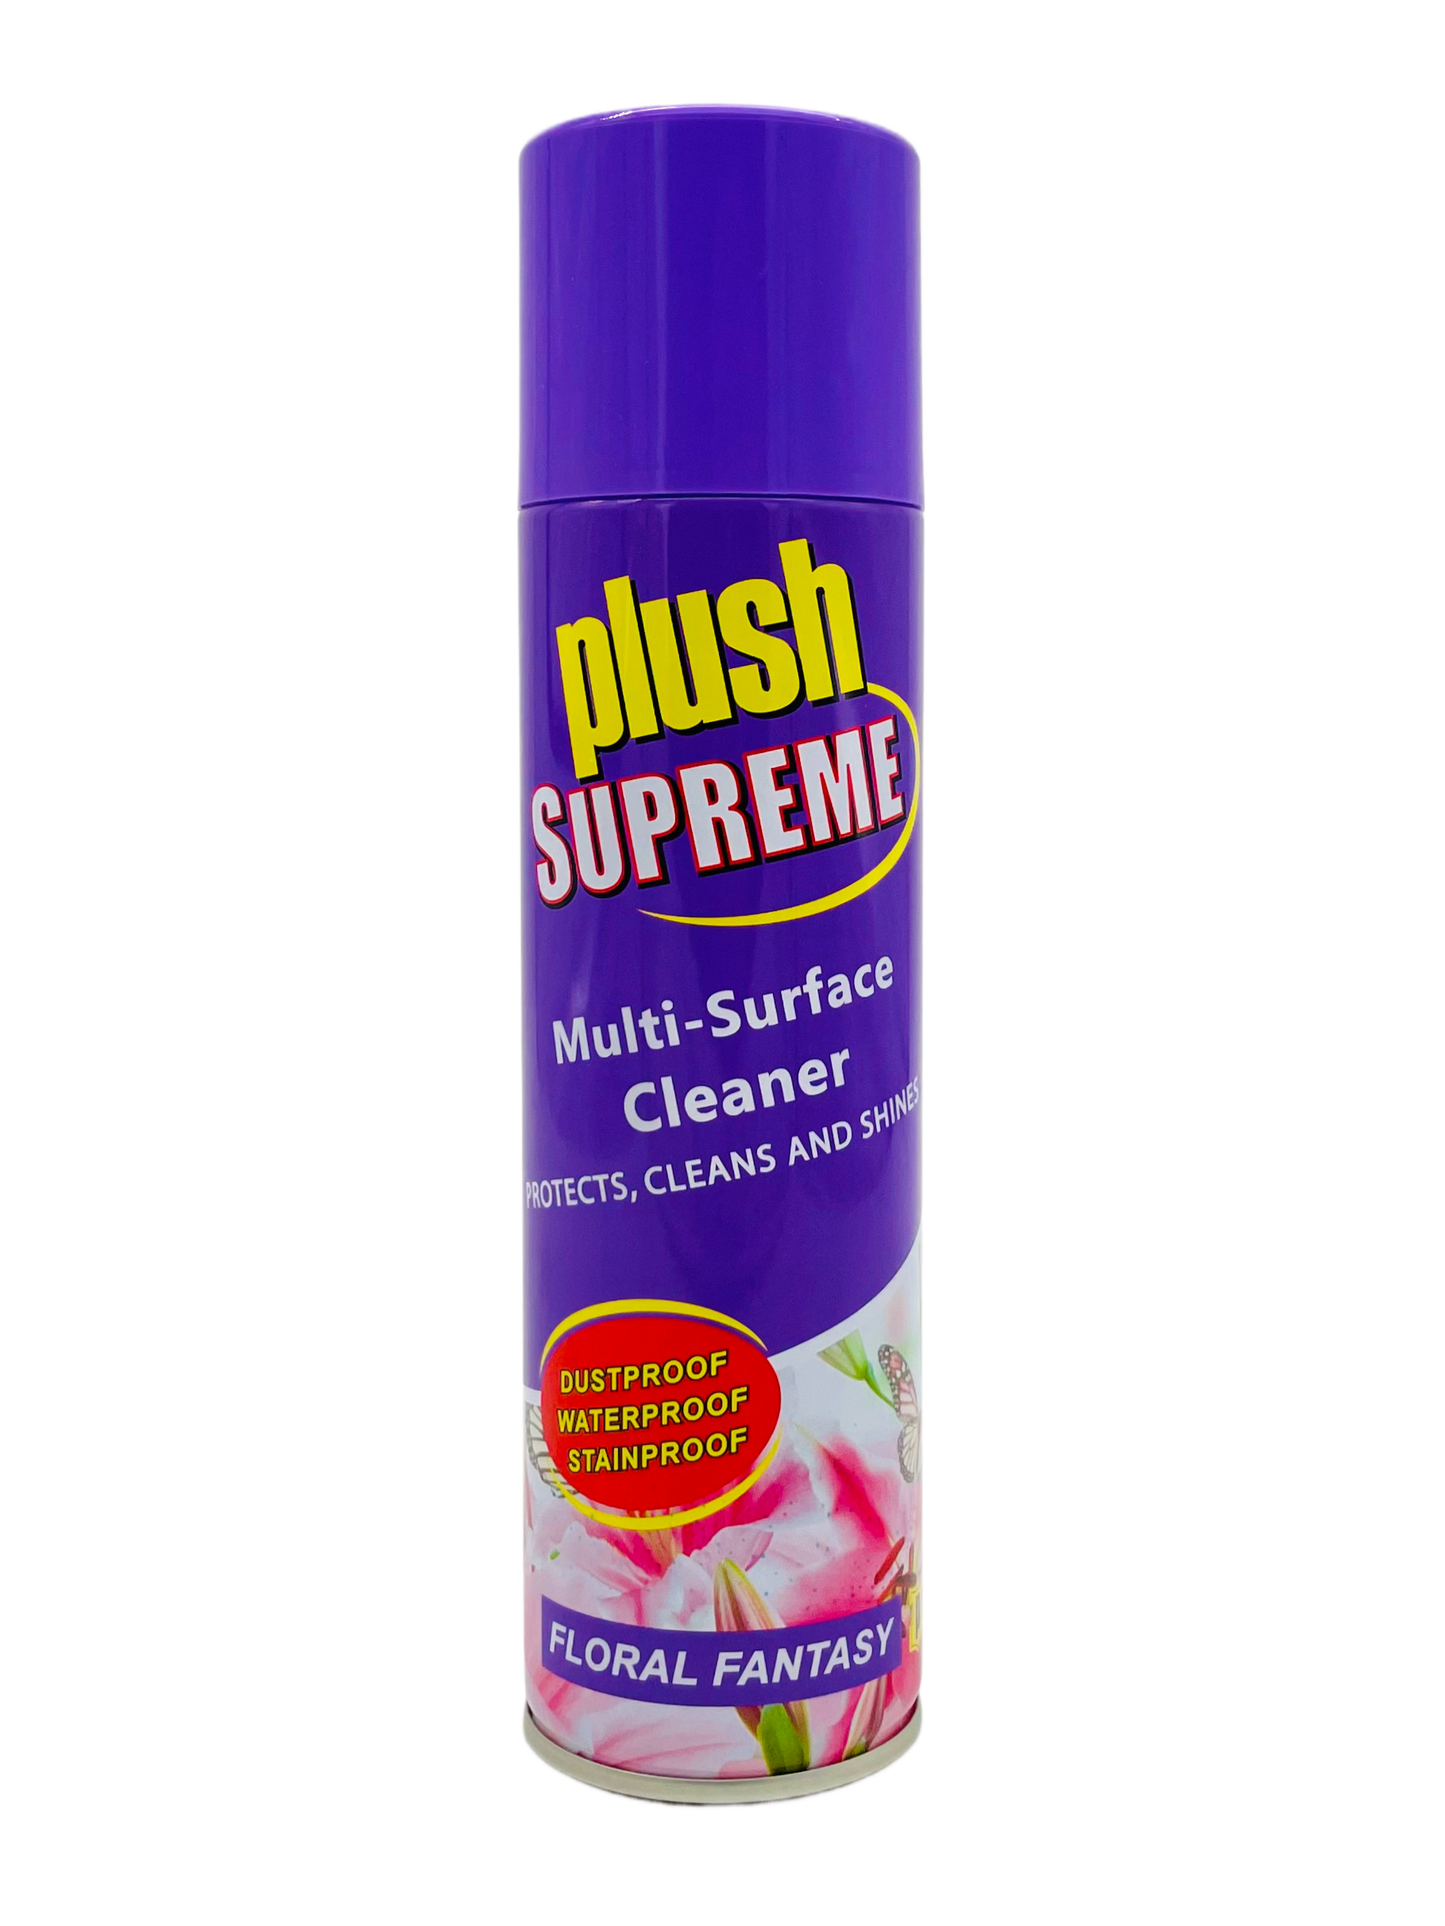 Plush Floral Fantasy Multi-Surface Cleaner